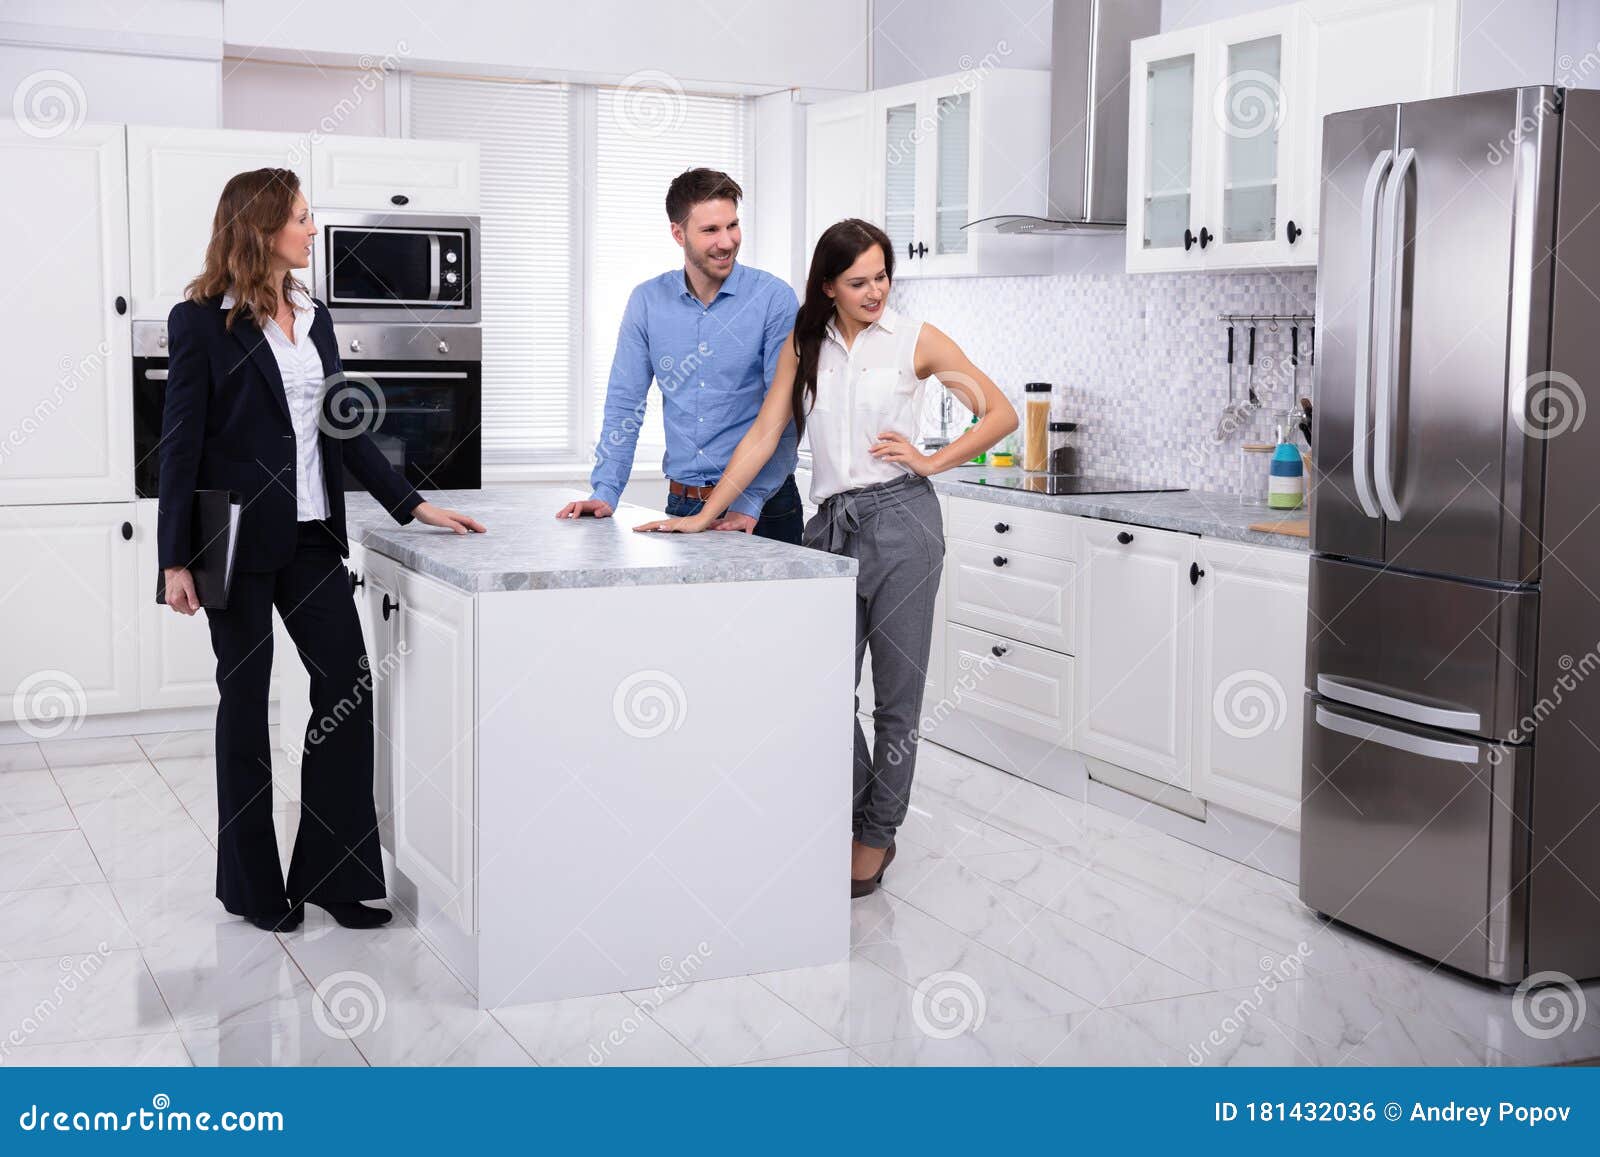 real estate agent showing refrigerator in house to a couple